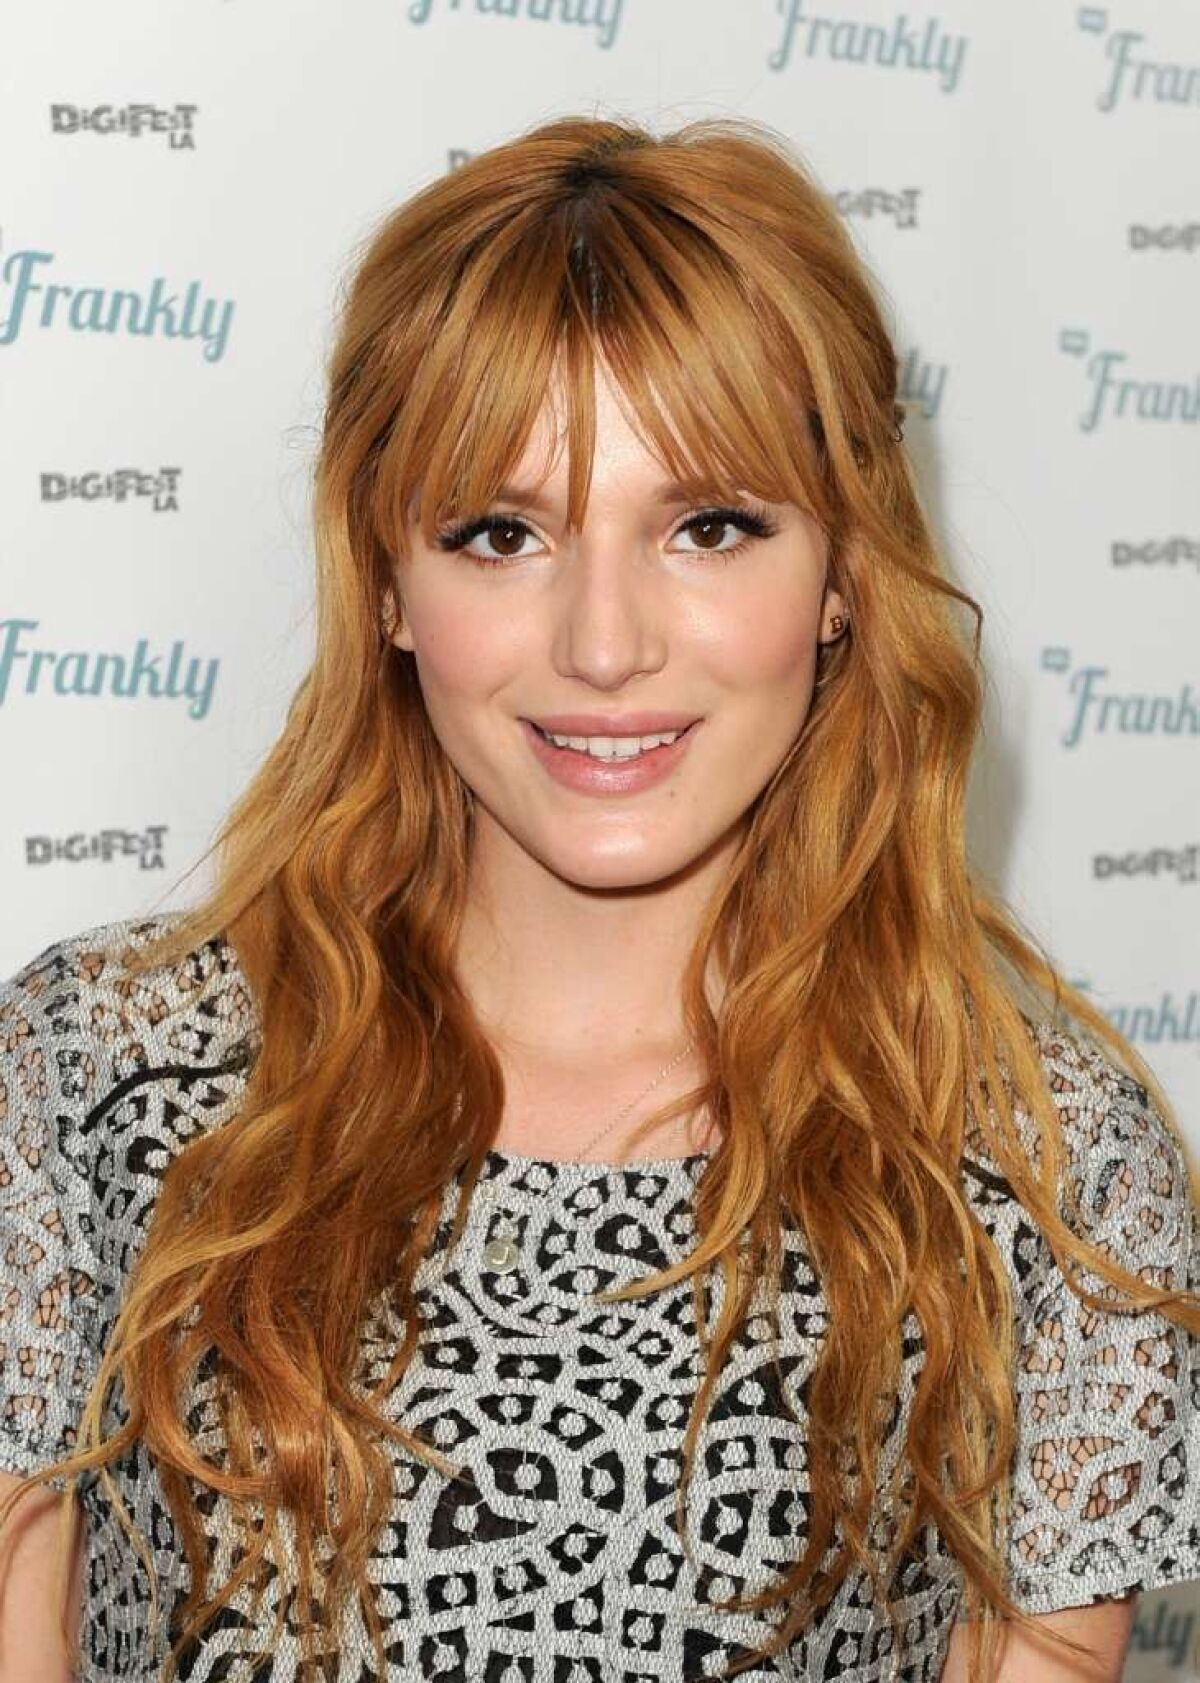 Bella Thorne attends DigiFest LA, the largest YouTube Music Festival, at Hollywood Palladium in 2013 in Hollywood.